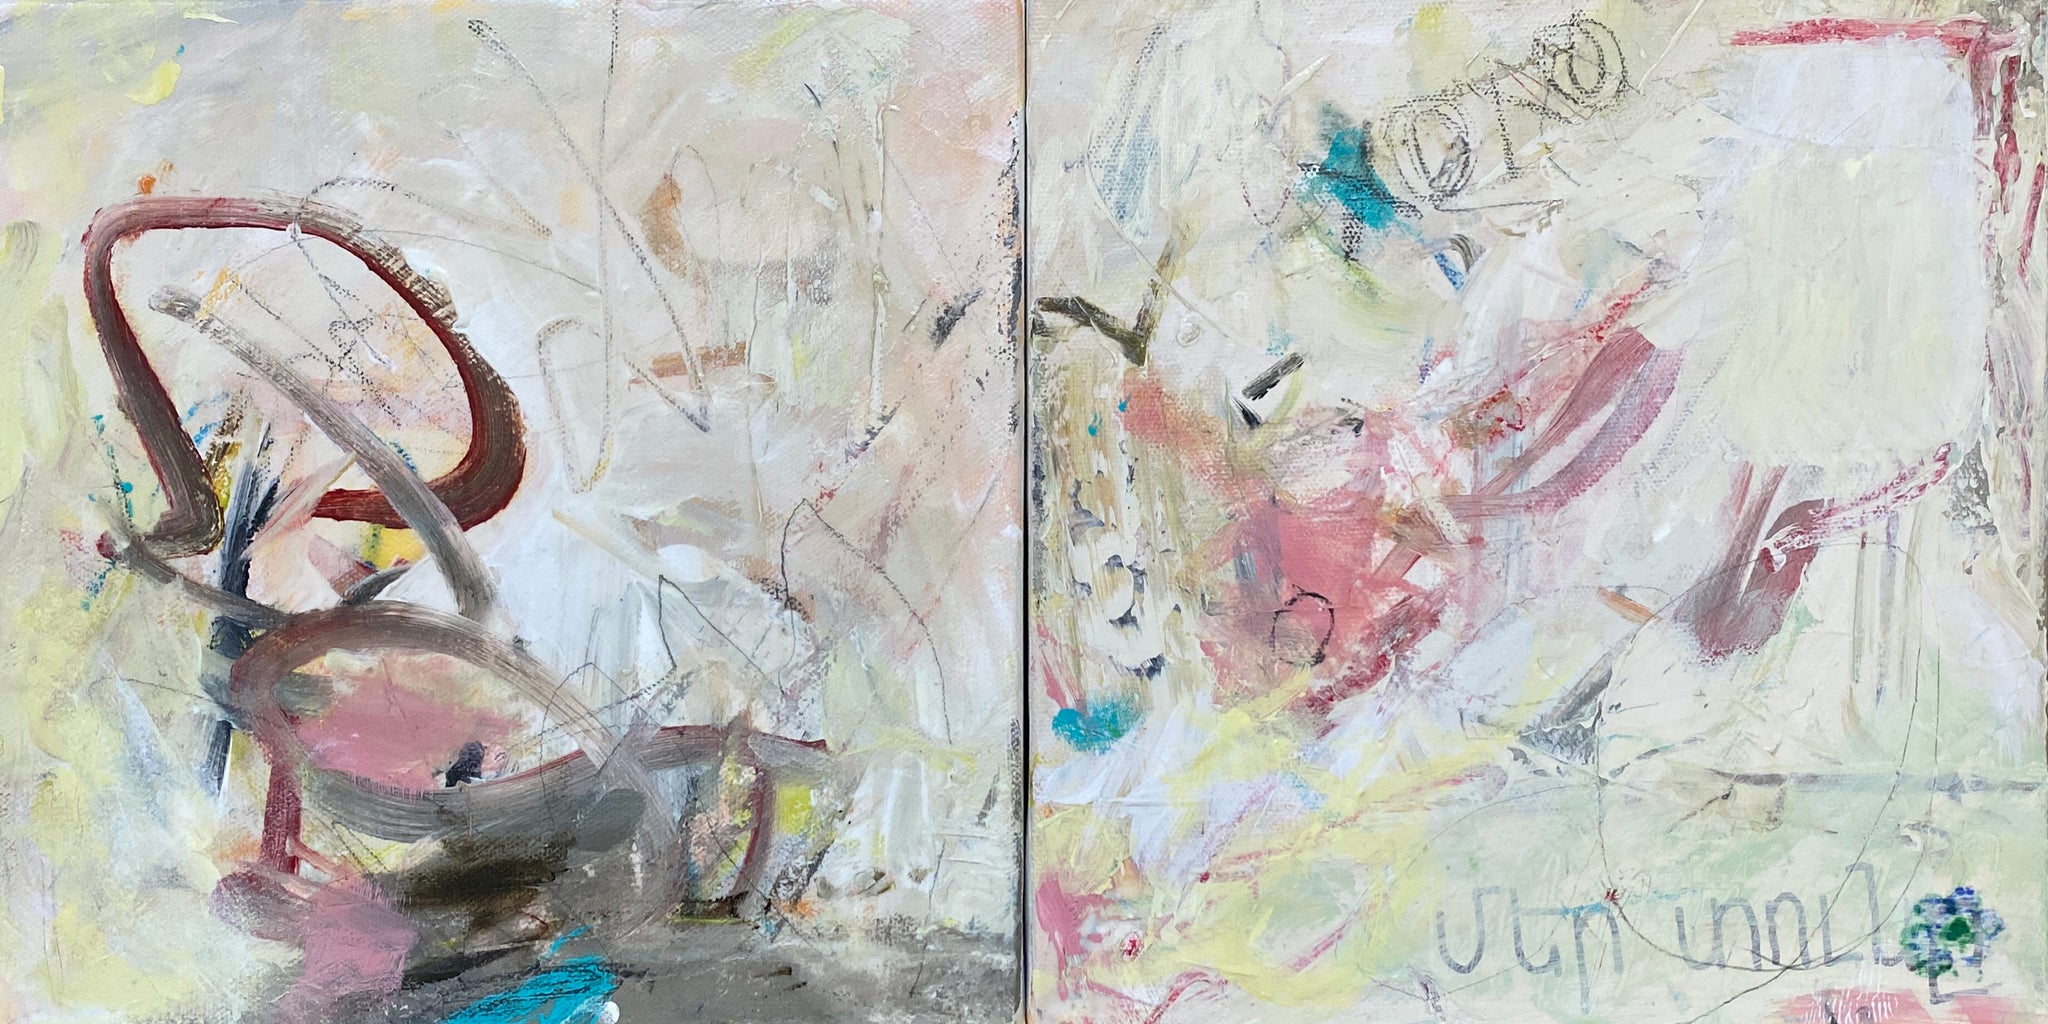 Translation of "Our Home" in Armenian - Diptych Acrylic Mixed Media on Canvas